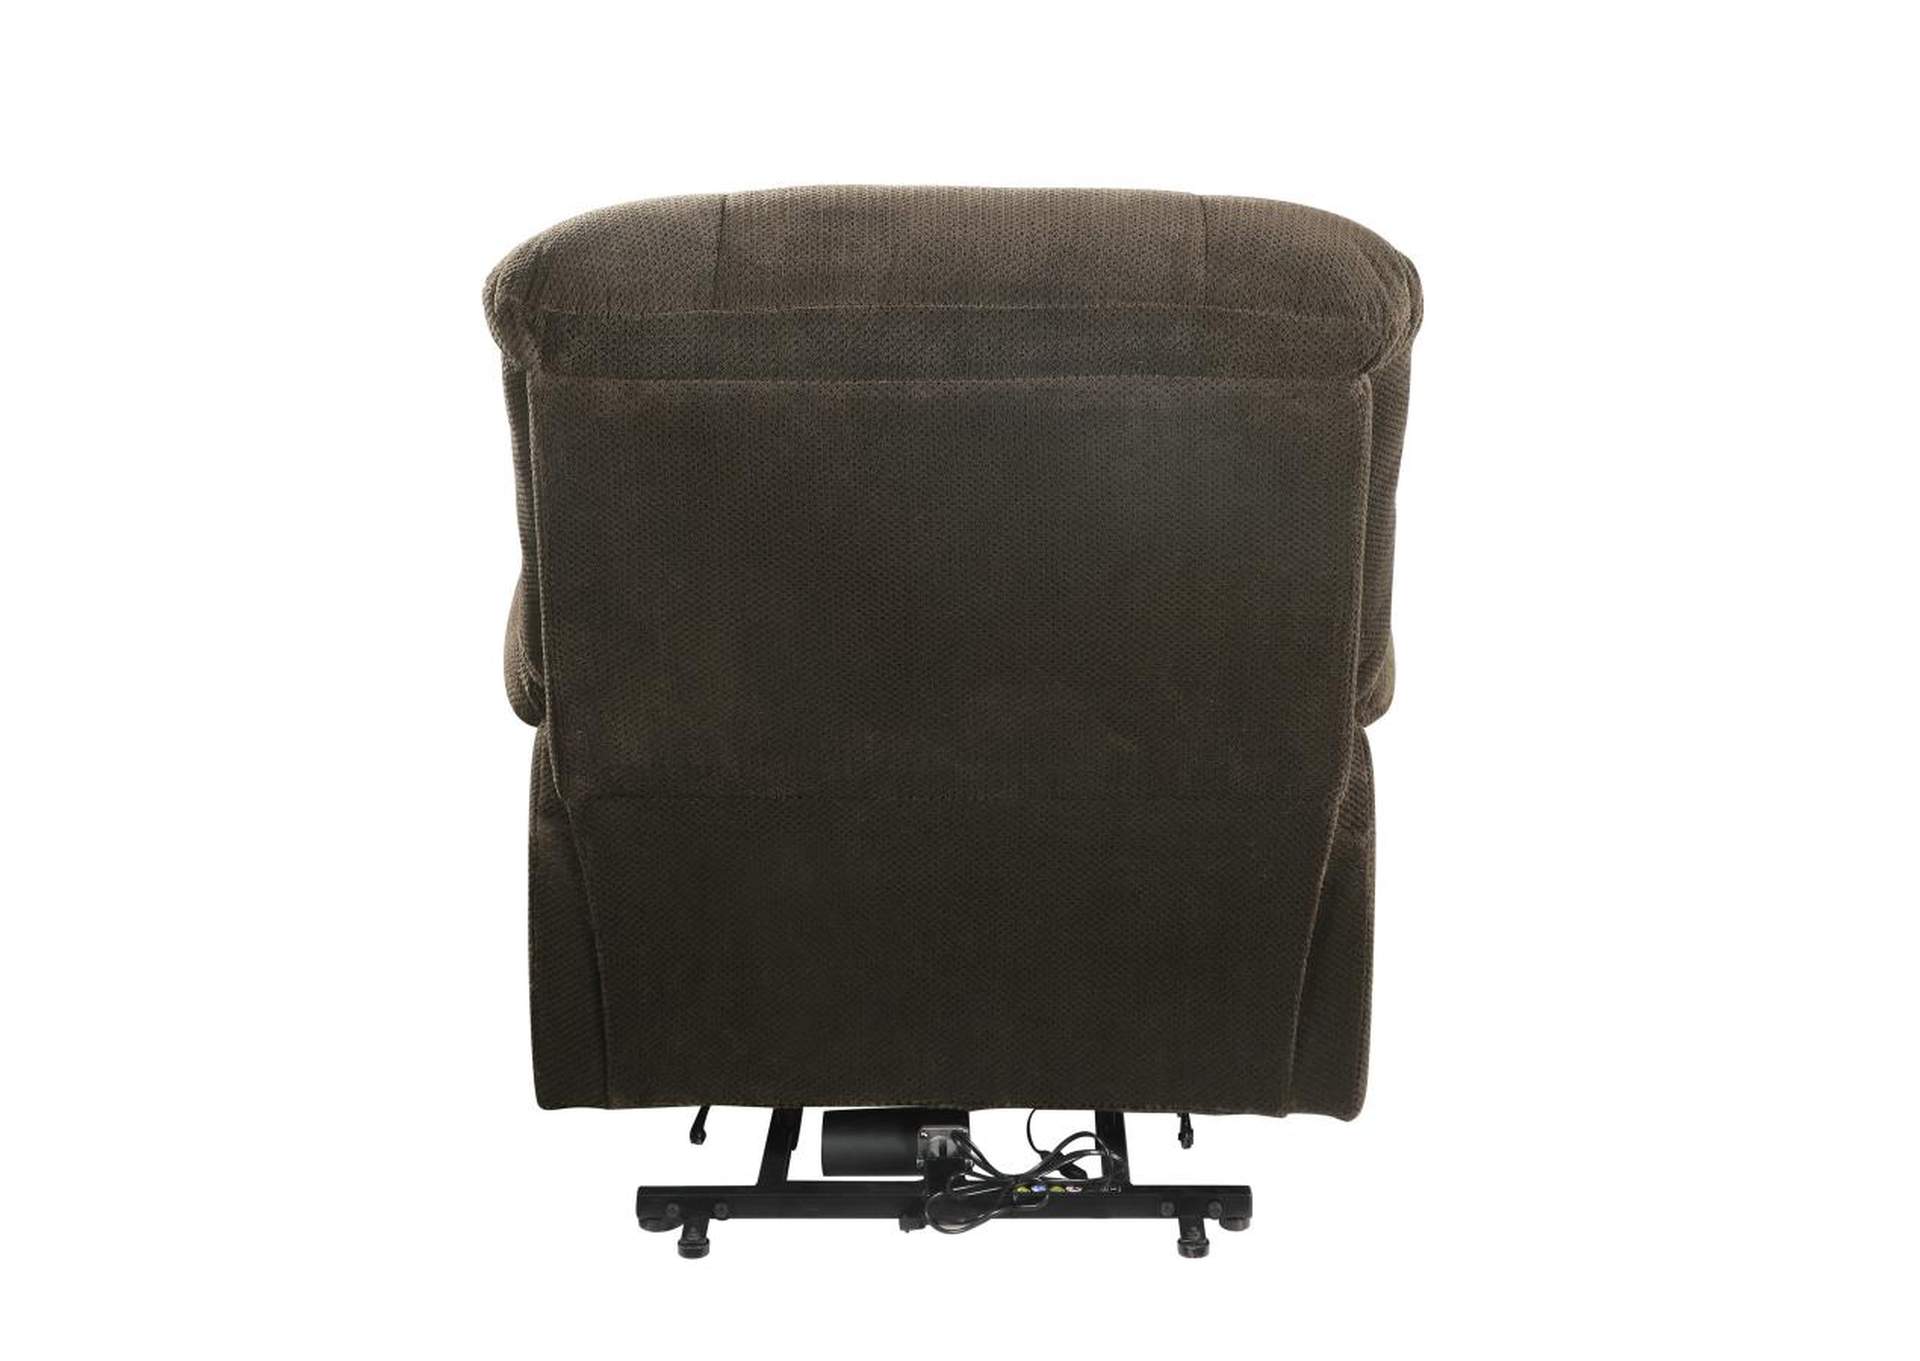 Upholstered Power Lift Recliner Chocolate,Coaster Furniture